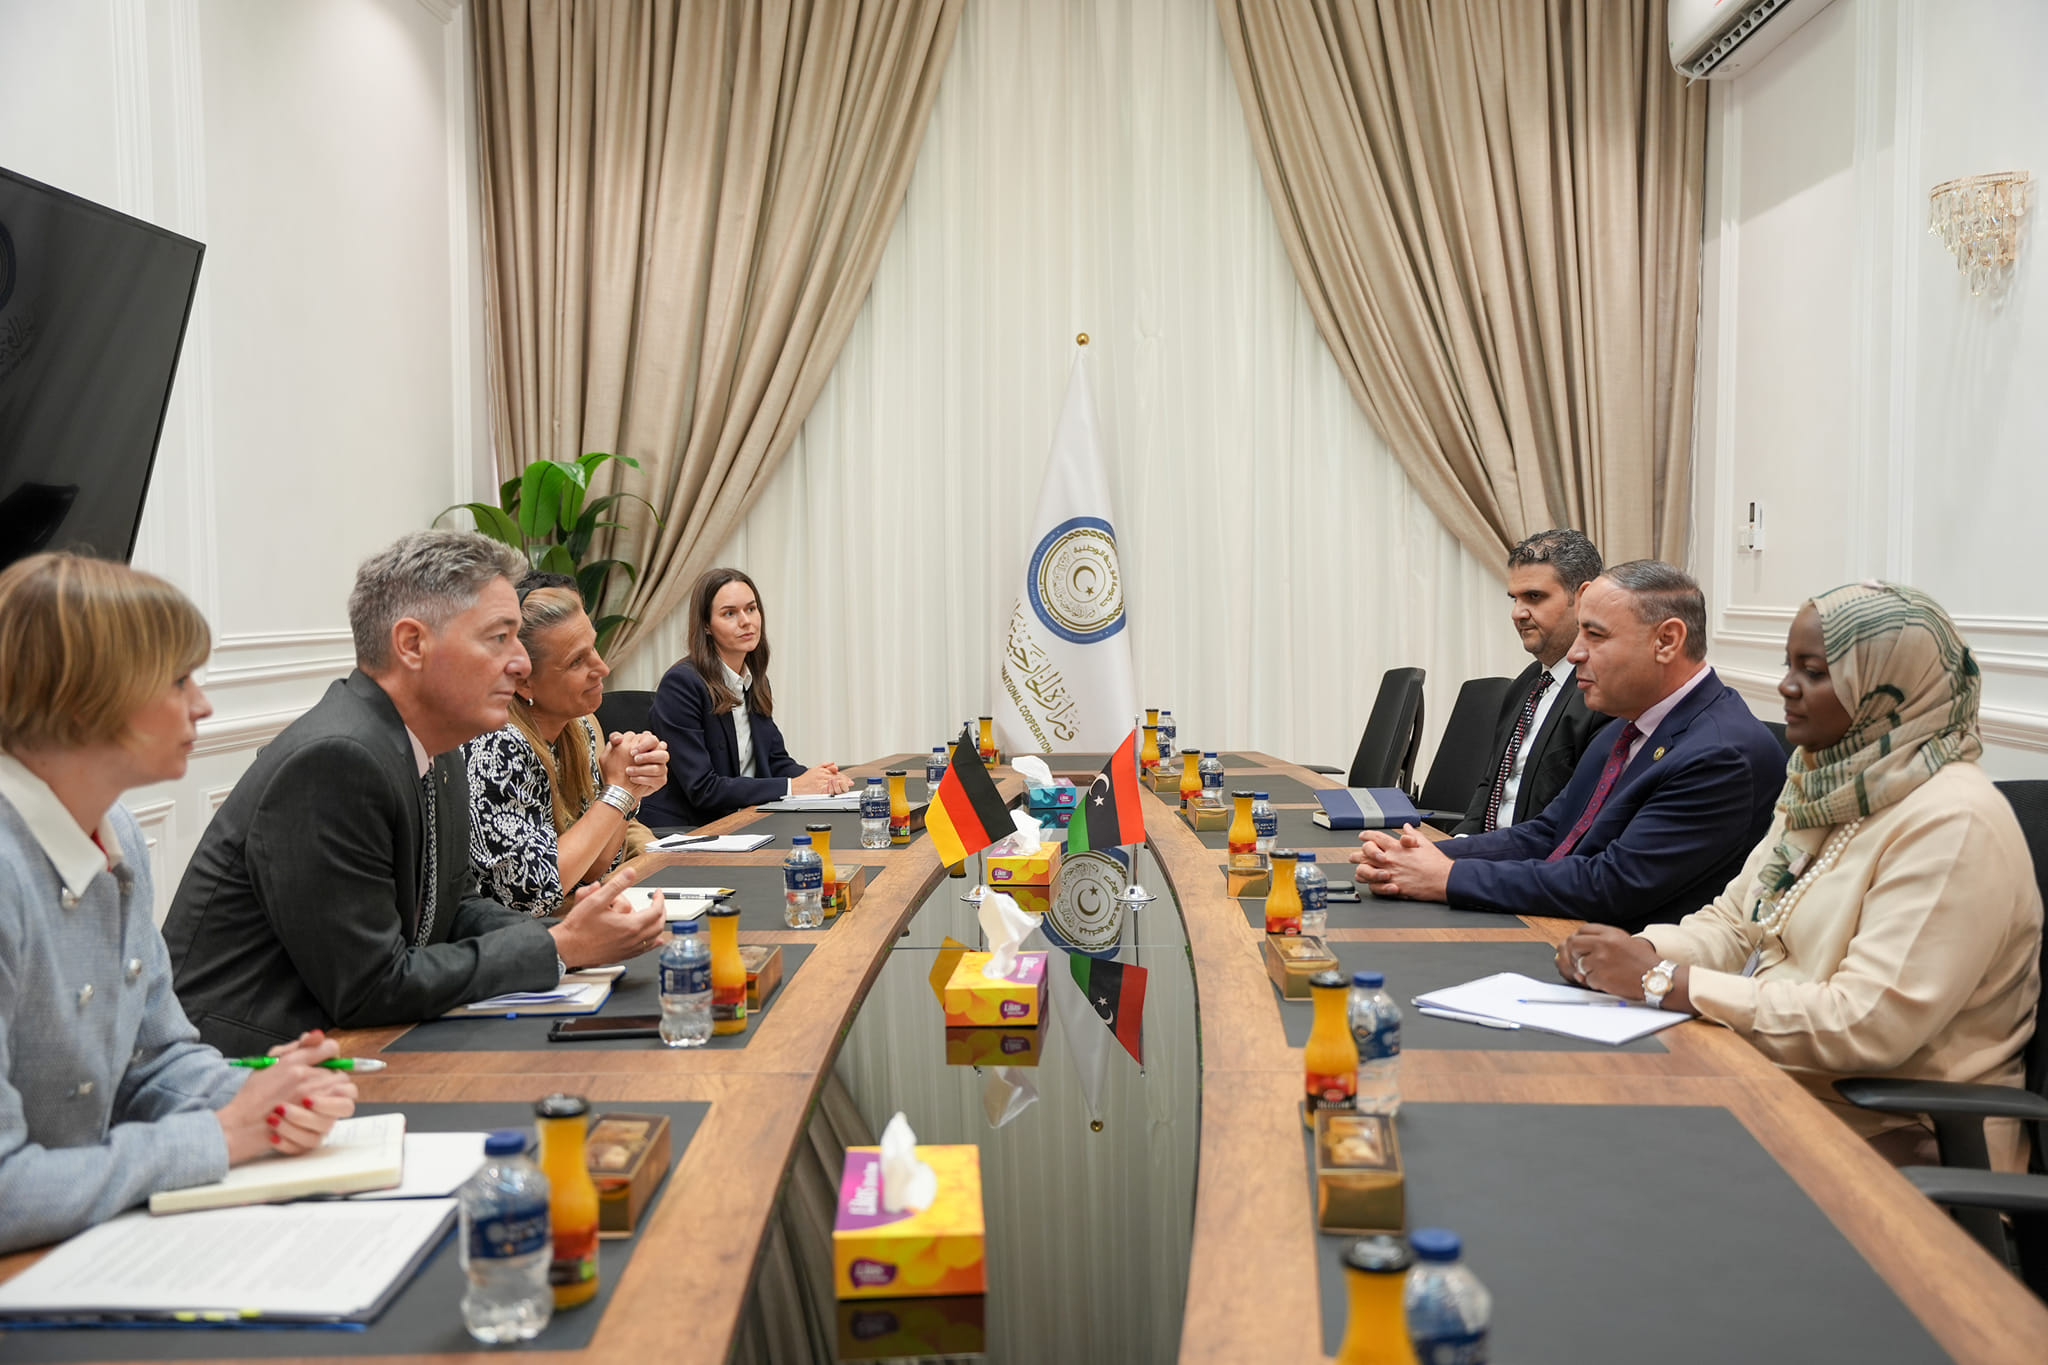 Al-Baour and the German Minister of State for Foreign Affairs discuss preparations for holding a conference on combating illegal immigration.